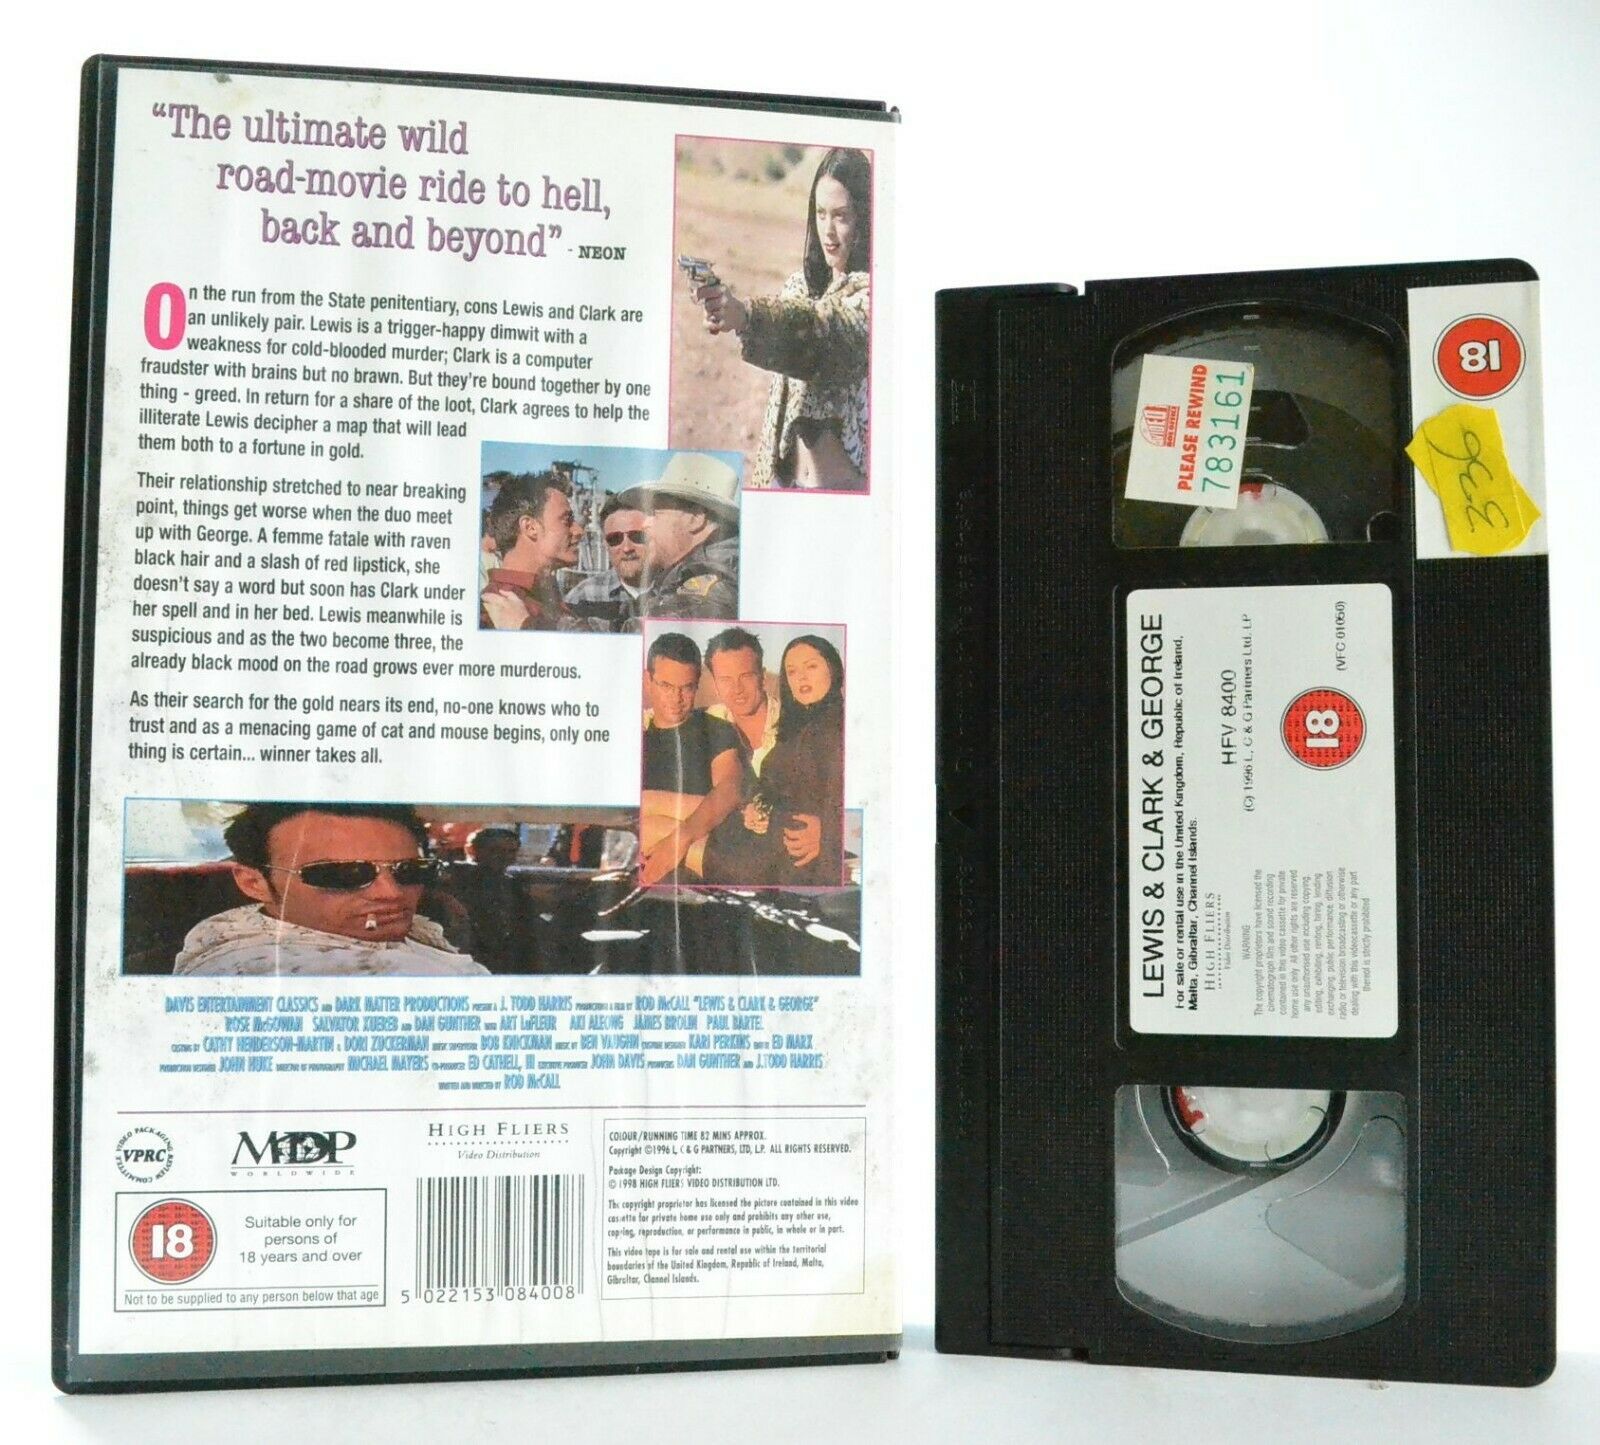 Lewis And Clark And George: Crime Comedy - Road Trip To Find The Treasure - VHS-